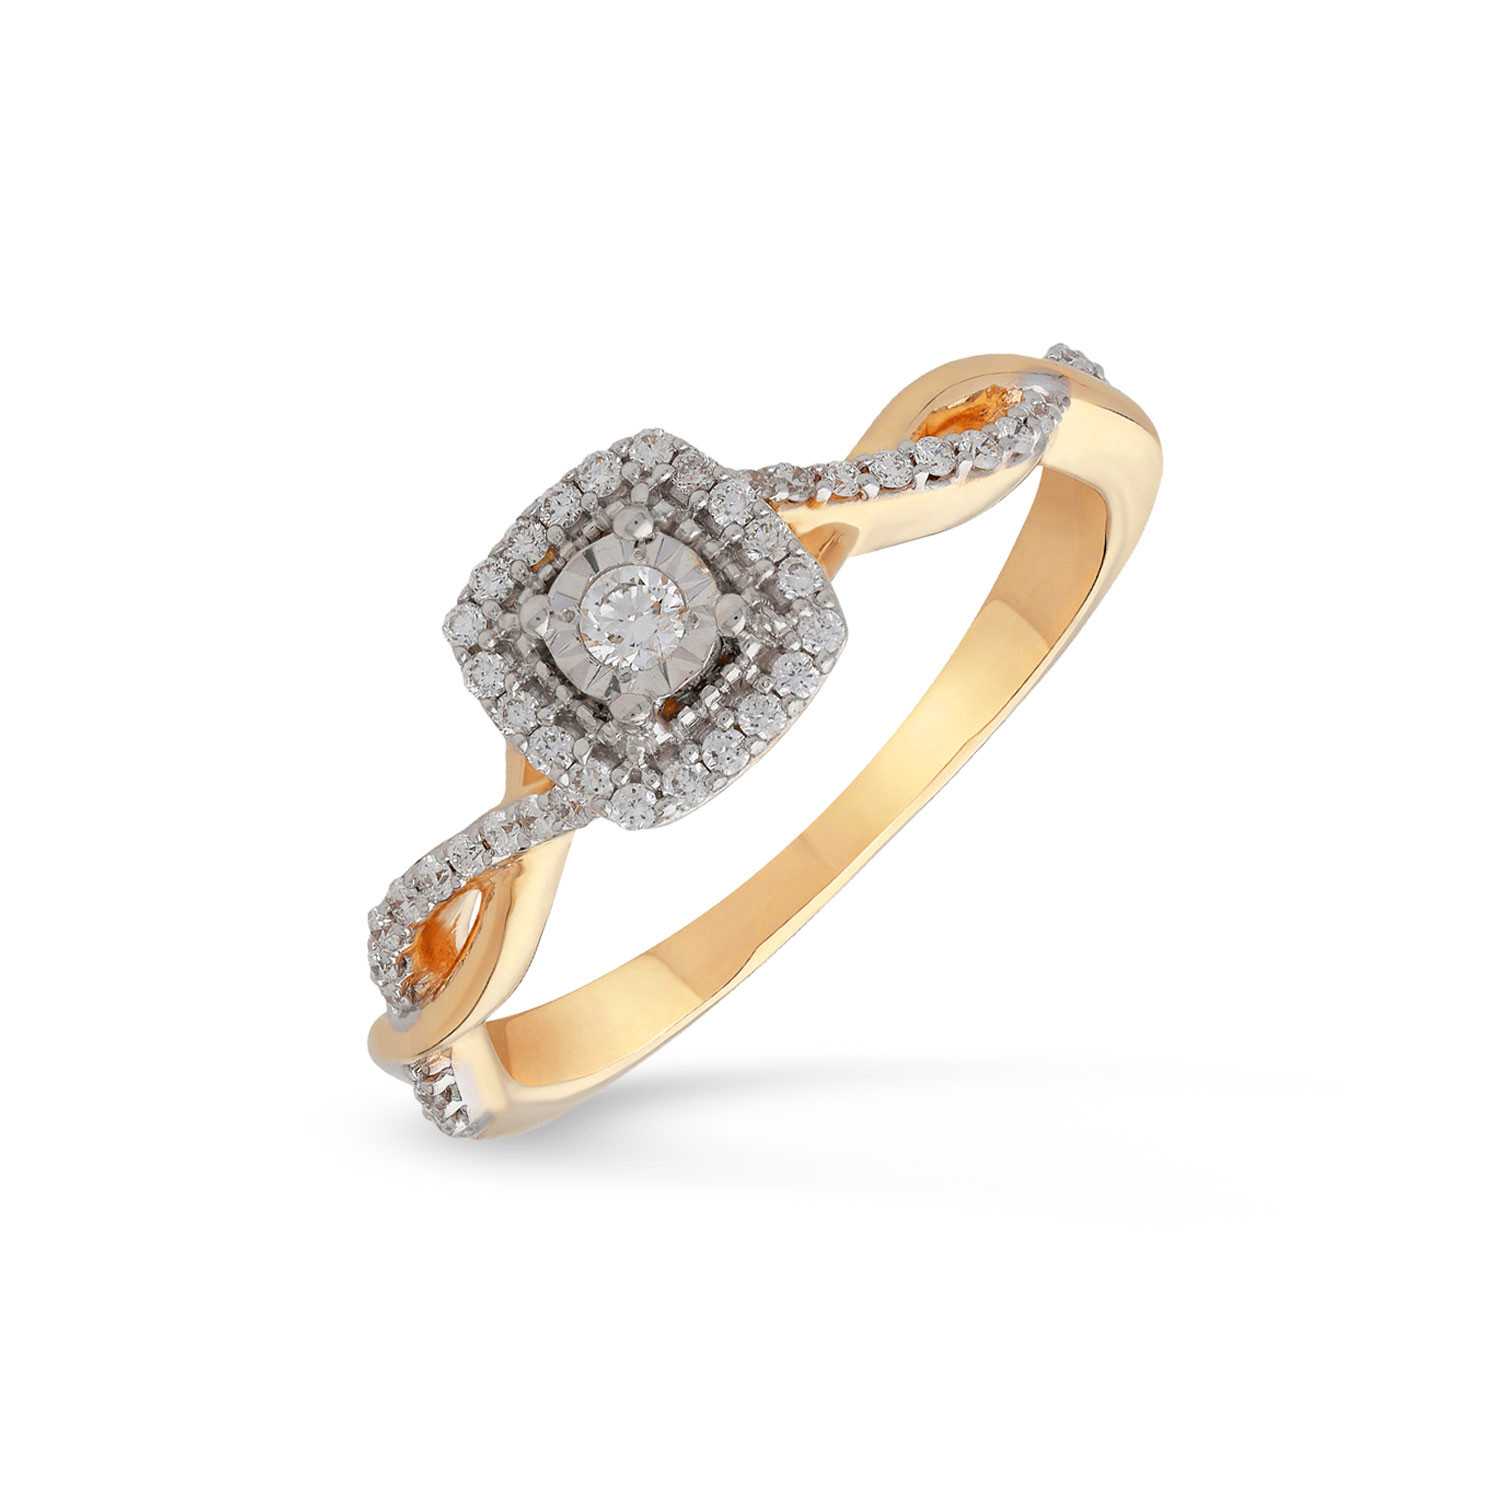 Mens Diamond Rings in 18K Gold -VVS Clarity E-F Color -Indian Gold Jewelry  -Buy Online